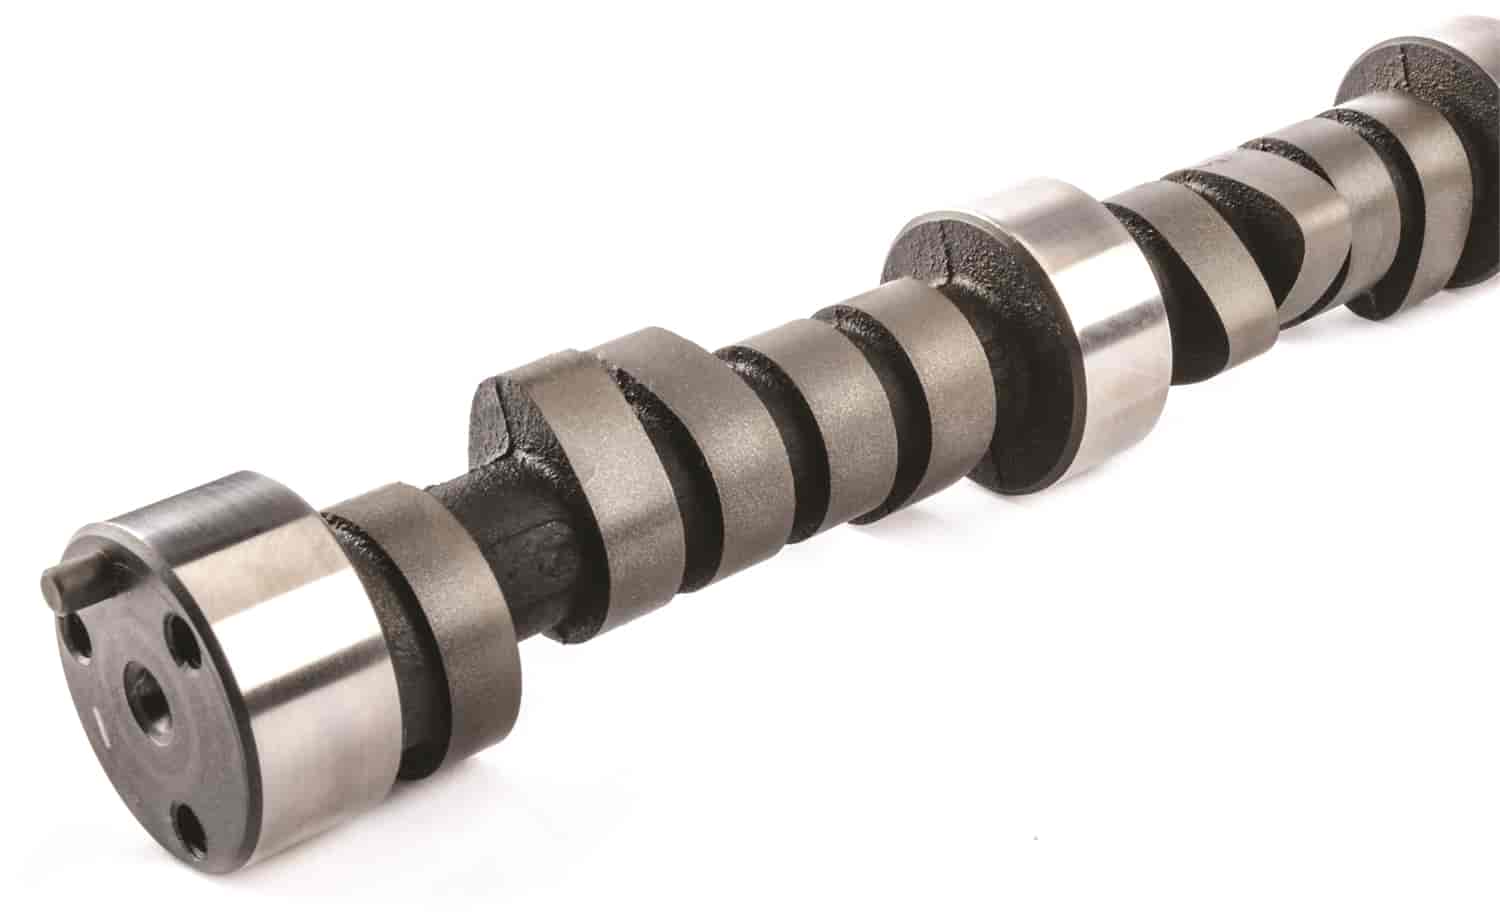 Thumpr Hydraulic Flat Tappet Camshaft Lift .479"/.465" Duration 279/297 RPM Range 2000 to 5800